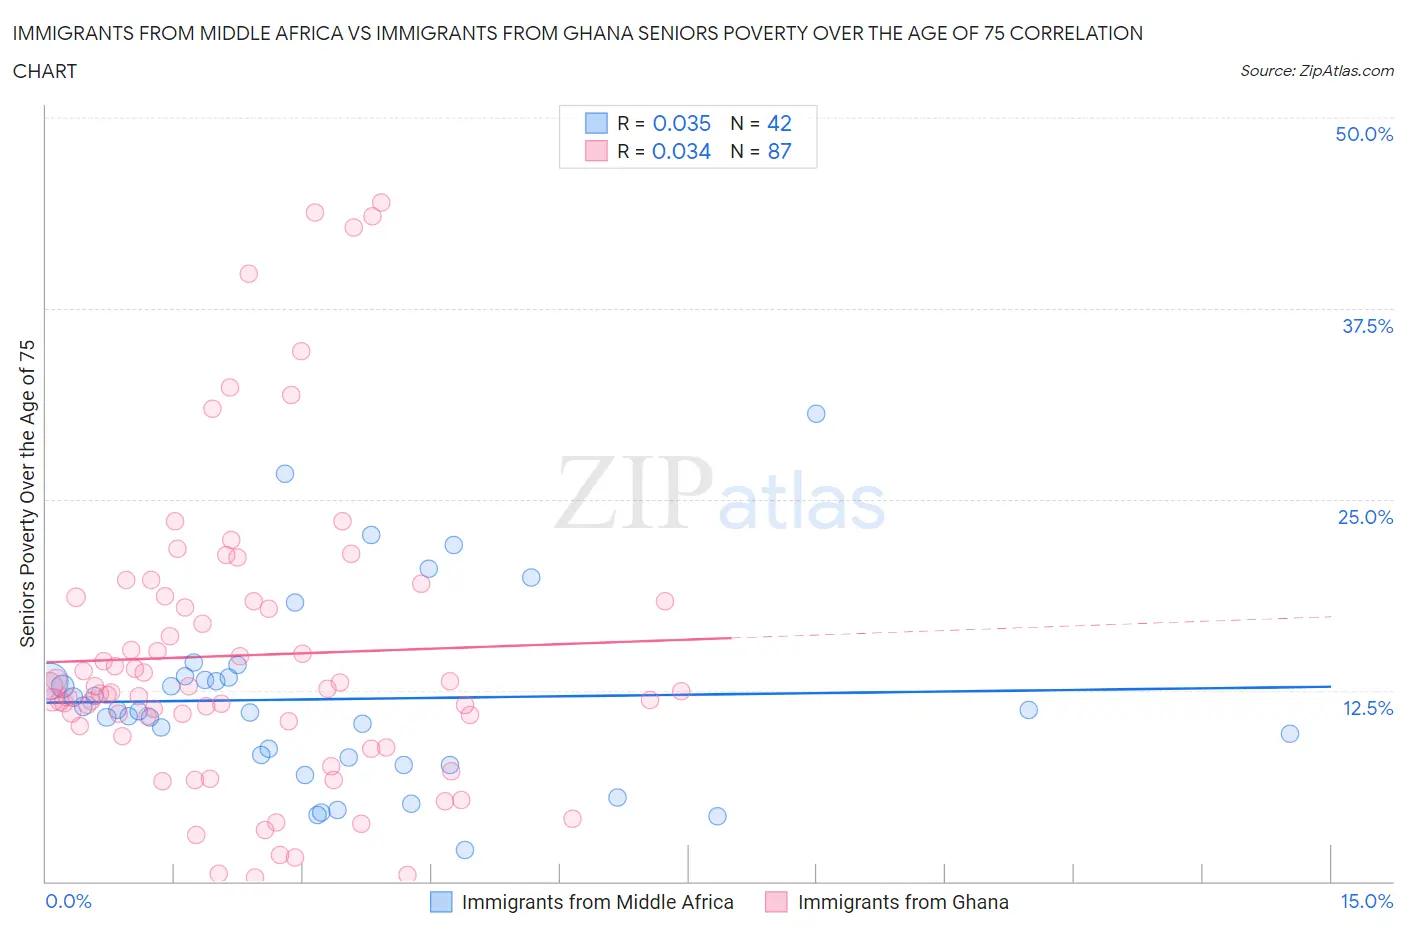 Immigrants from Middle Africa vs Immigrants from Ghana Seniors Poverty Over the Age of 75